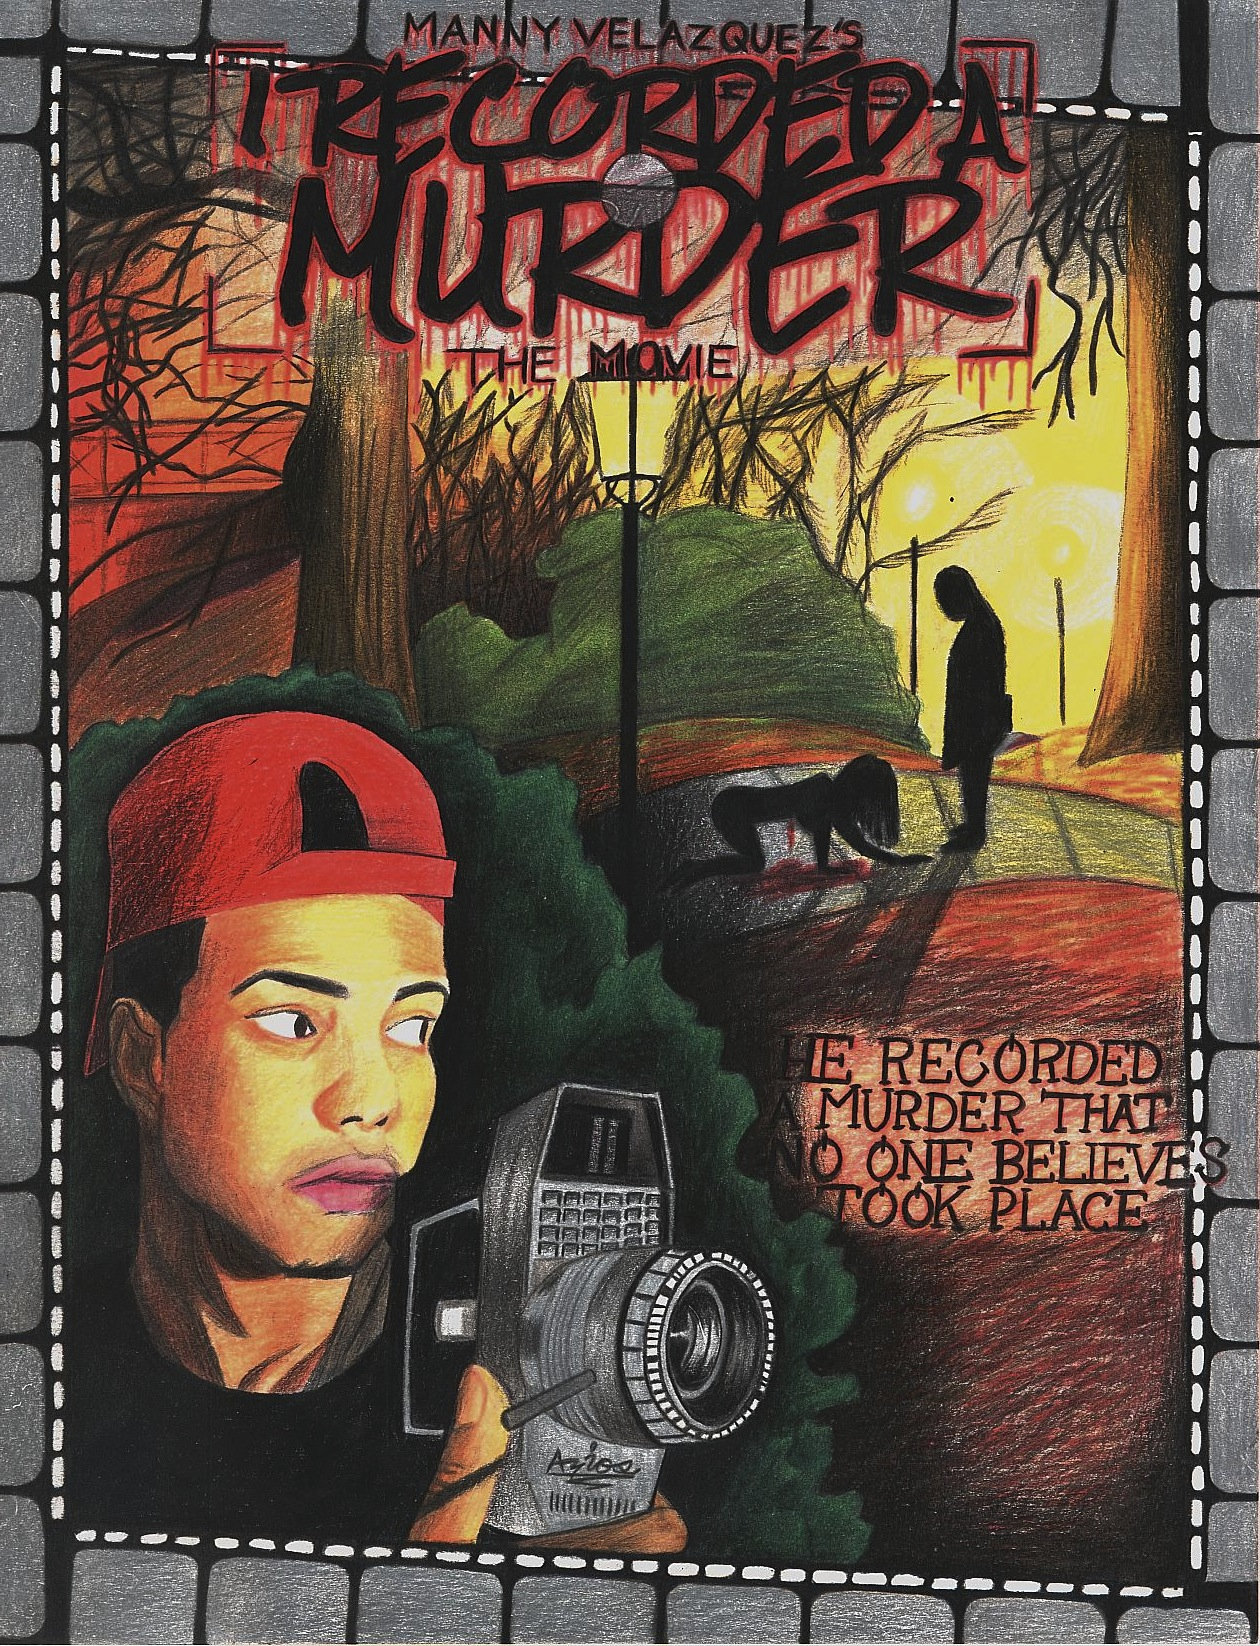 Theatrical Poster for Manny Velazquez's 